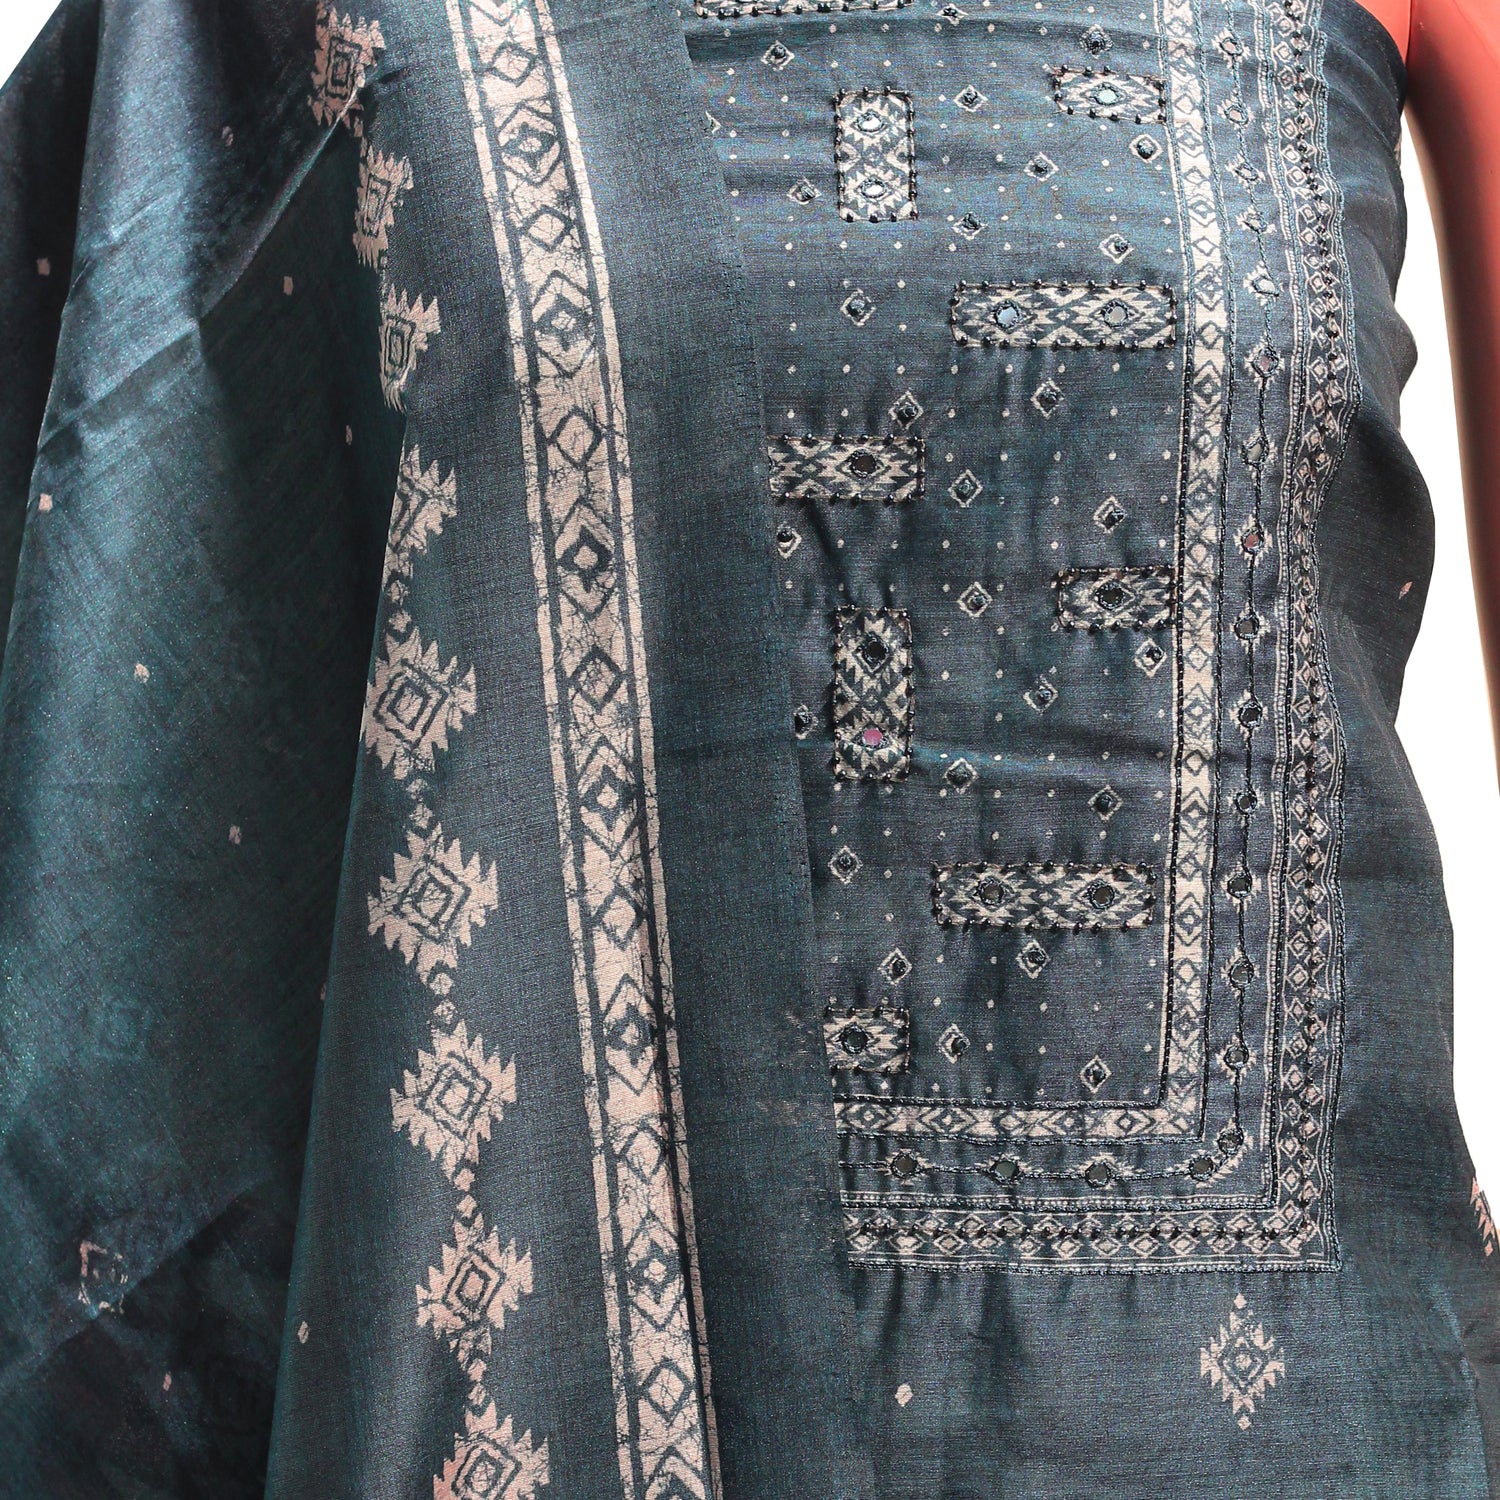 close up view of dress material with mirror and beaded work on the yoke